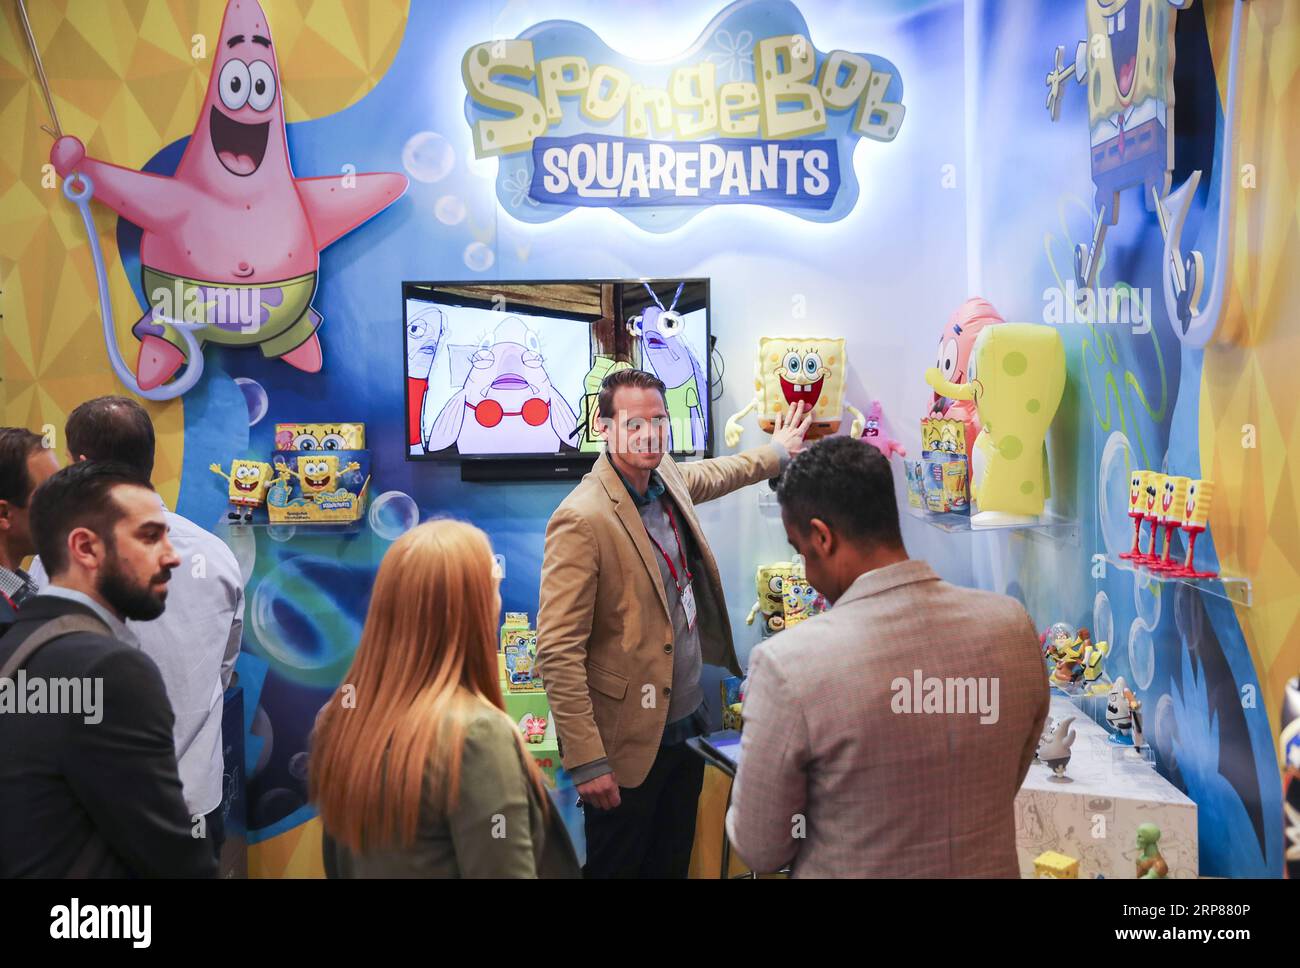 (190221) -- NEW YORK, Feb. 21, 2019 -- Visitors look at toy products of SpongeBob at the booth of Alpha Group Co., Ltd., a major animation, toy and entertainment player from Guangdong Province in southern China, during the 116th Annual North American International Toy Fair at the Jacob K. Javits Convention Center in New York, the United States, on Feb. 19, 2019. Chinese toy manufacturers, which produce around 75 percent of global toys each year, are rising up the value chain from the original role as contract manufacturers to designers and makers of their own brands. ) U.S.-NEW YORK-CHINESE TO Stock Photo